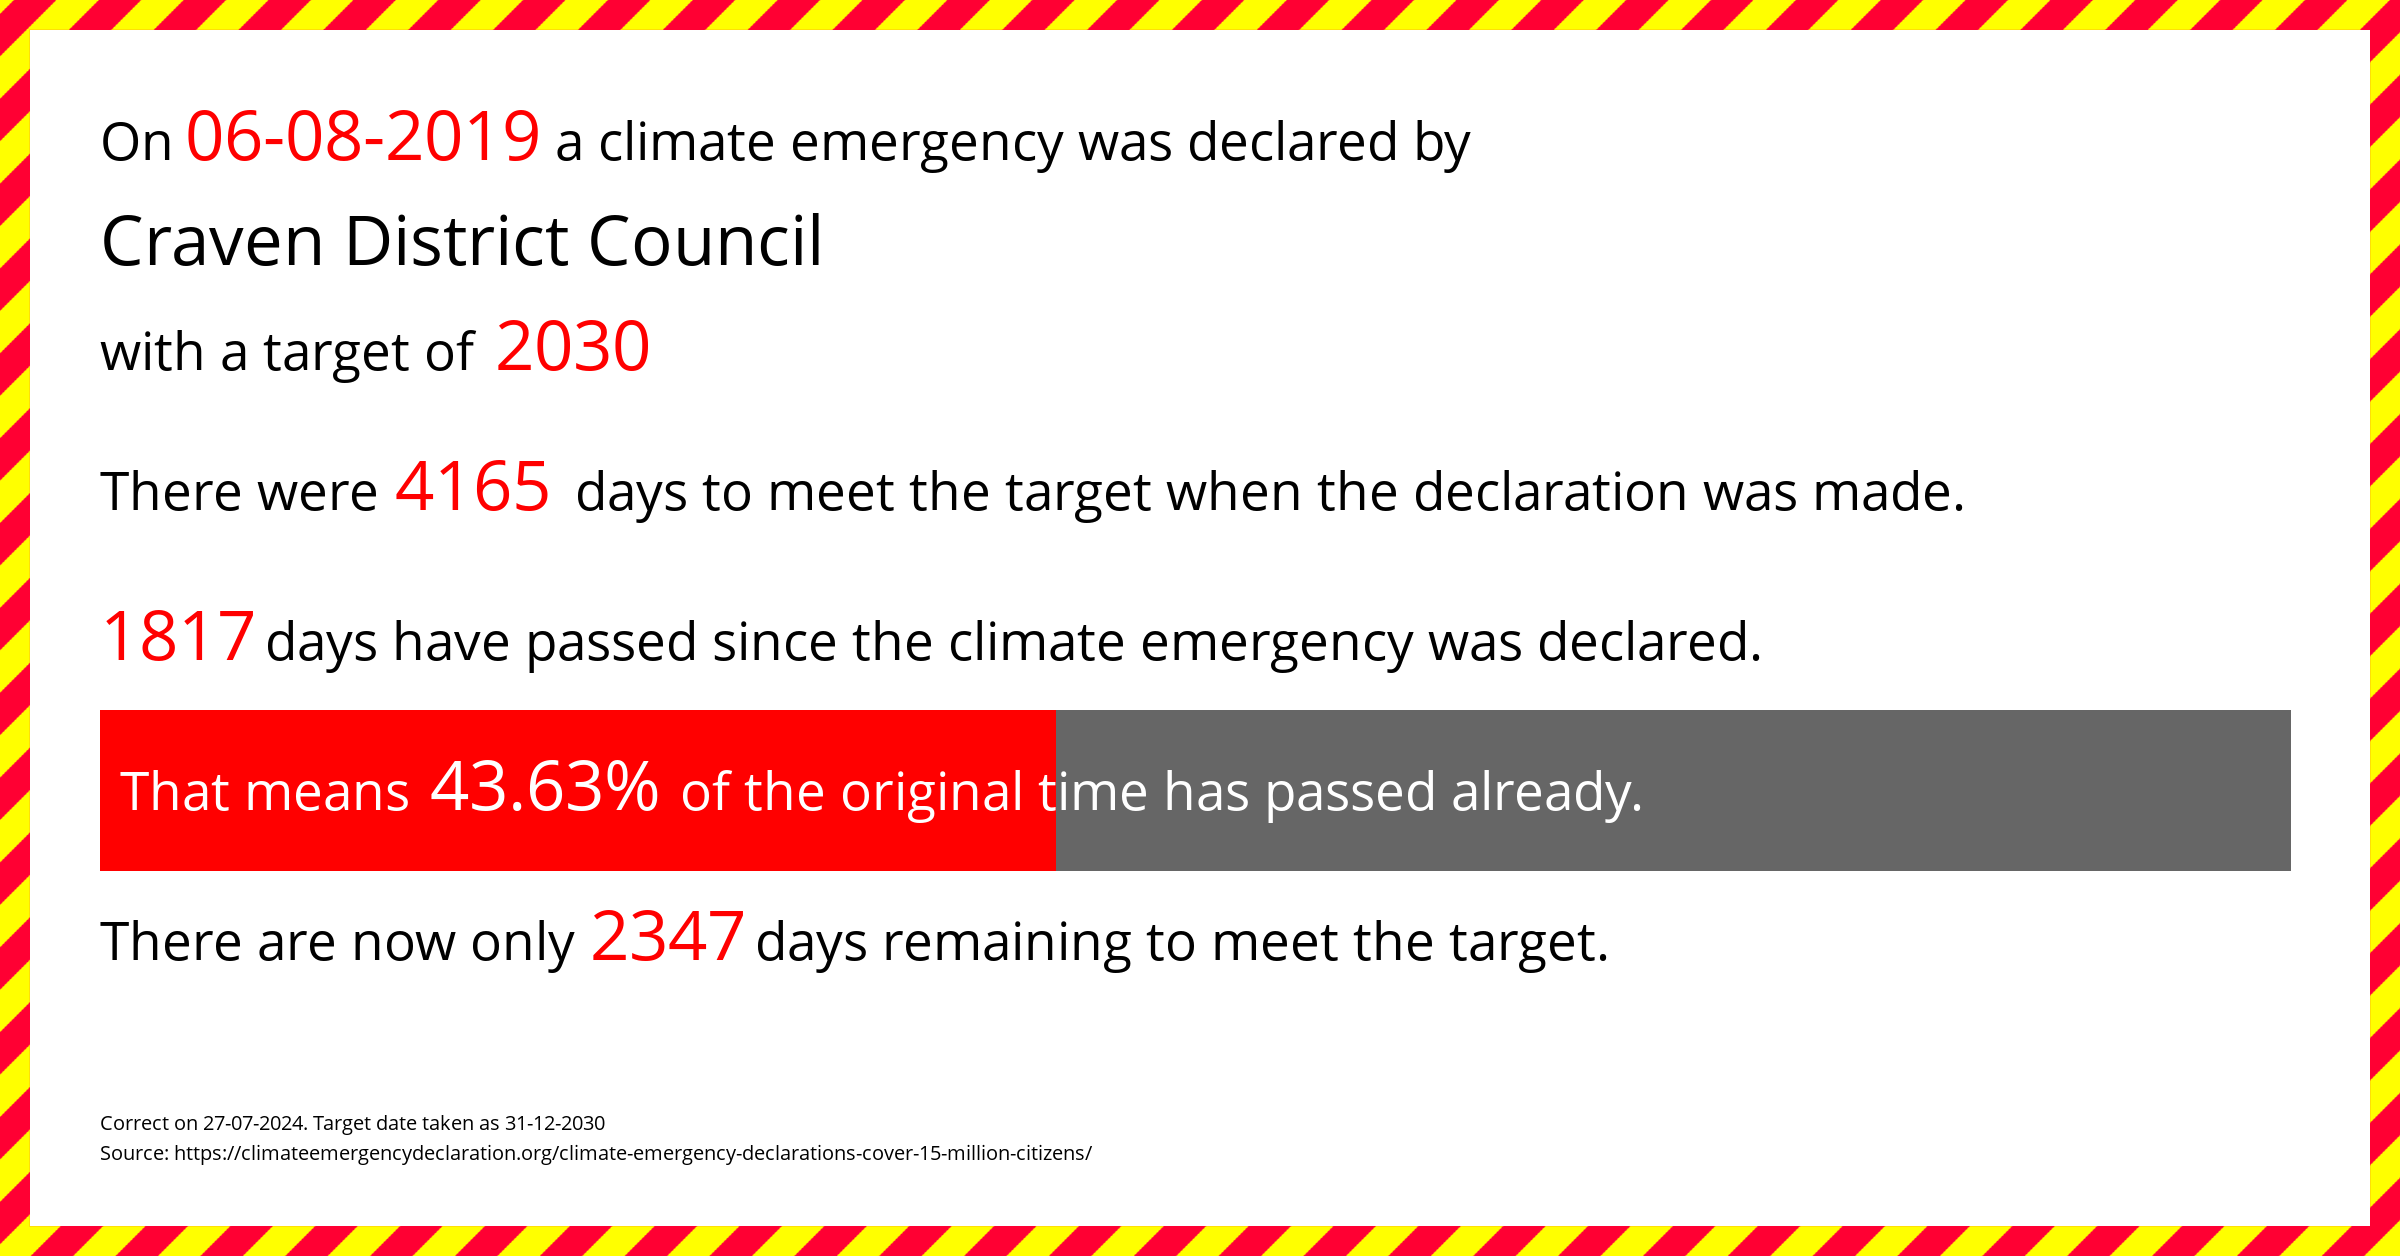 Craven District Council declared a Climate emergency on Tuesday 6th August 2019, with a target of 2030.